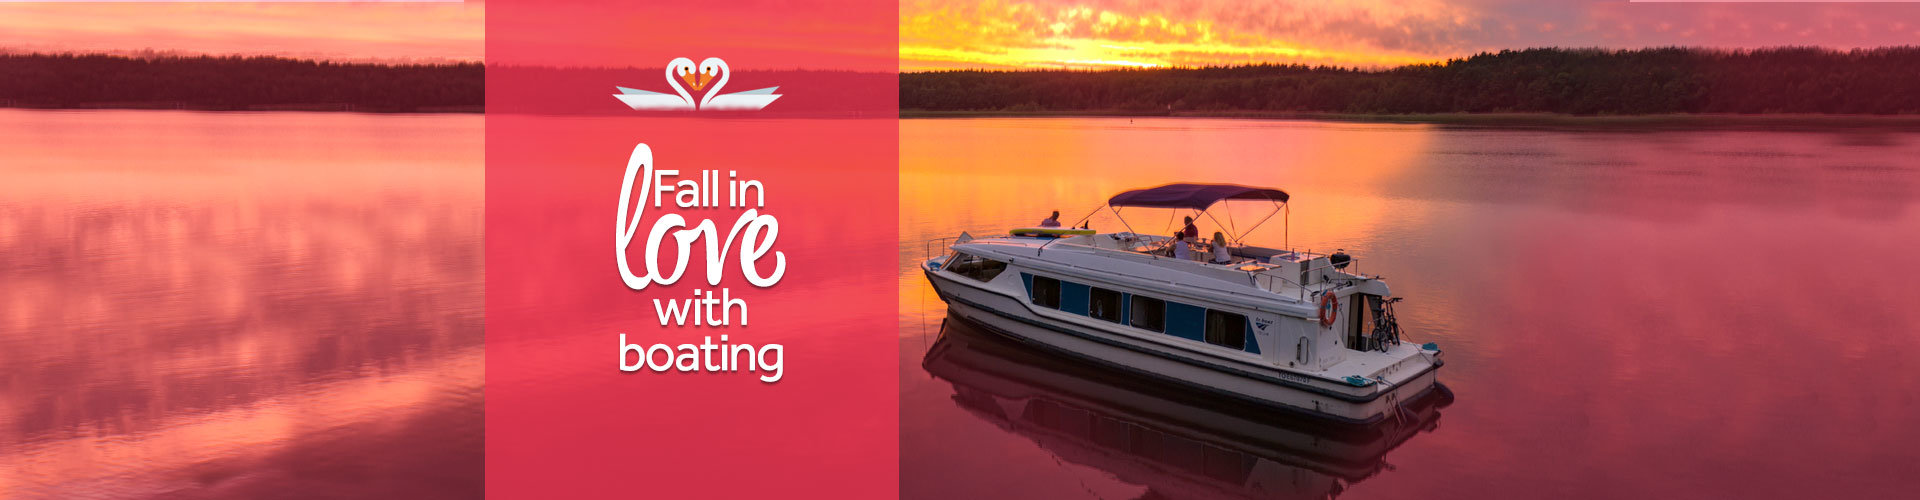 Fall in Love with Boating 